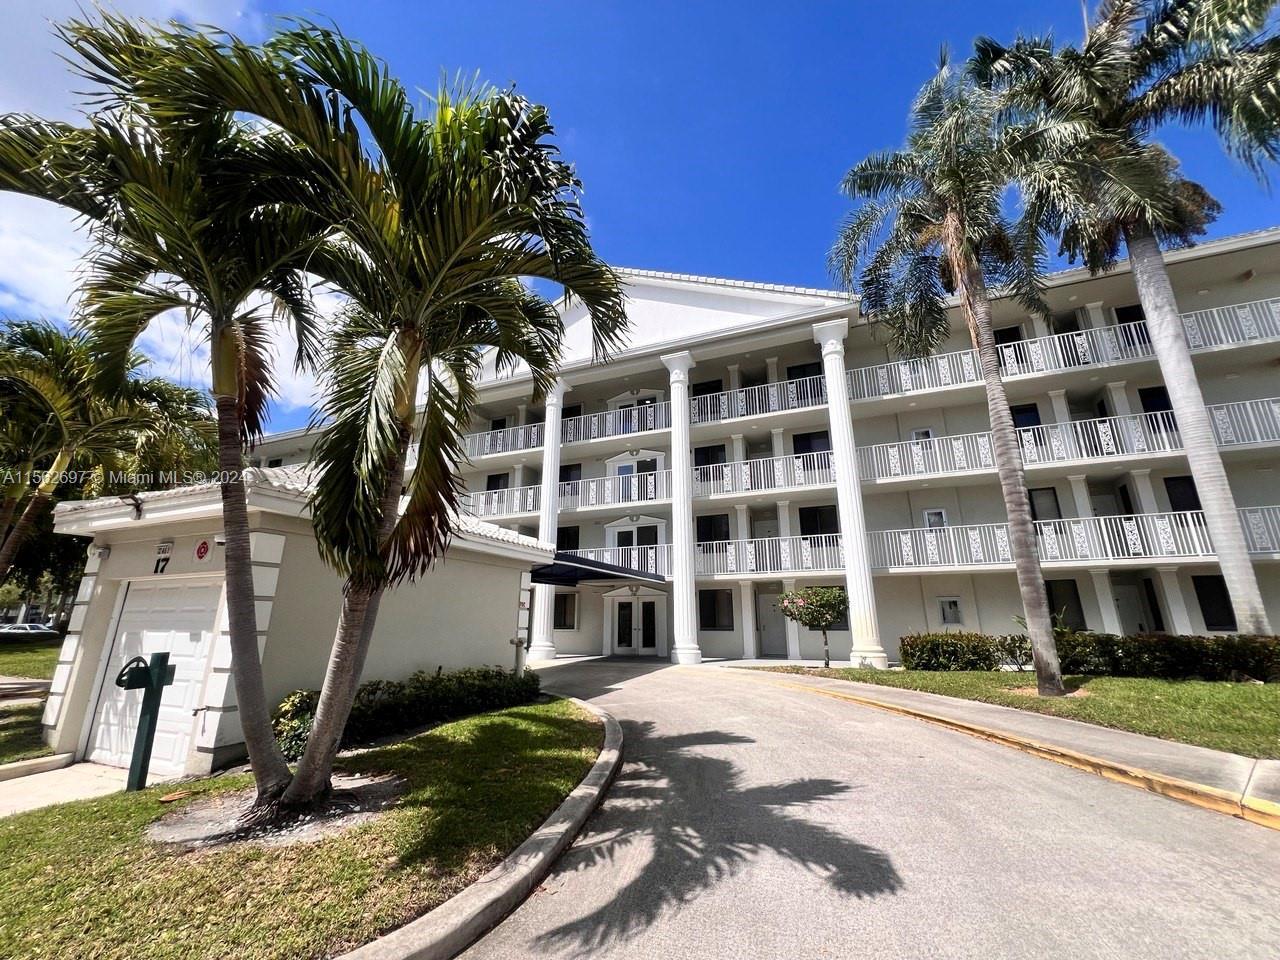 Condo for sale in the sought after community of Whitehall Condominiums in WPB. Come enjoy amazing su